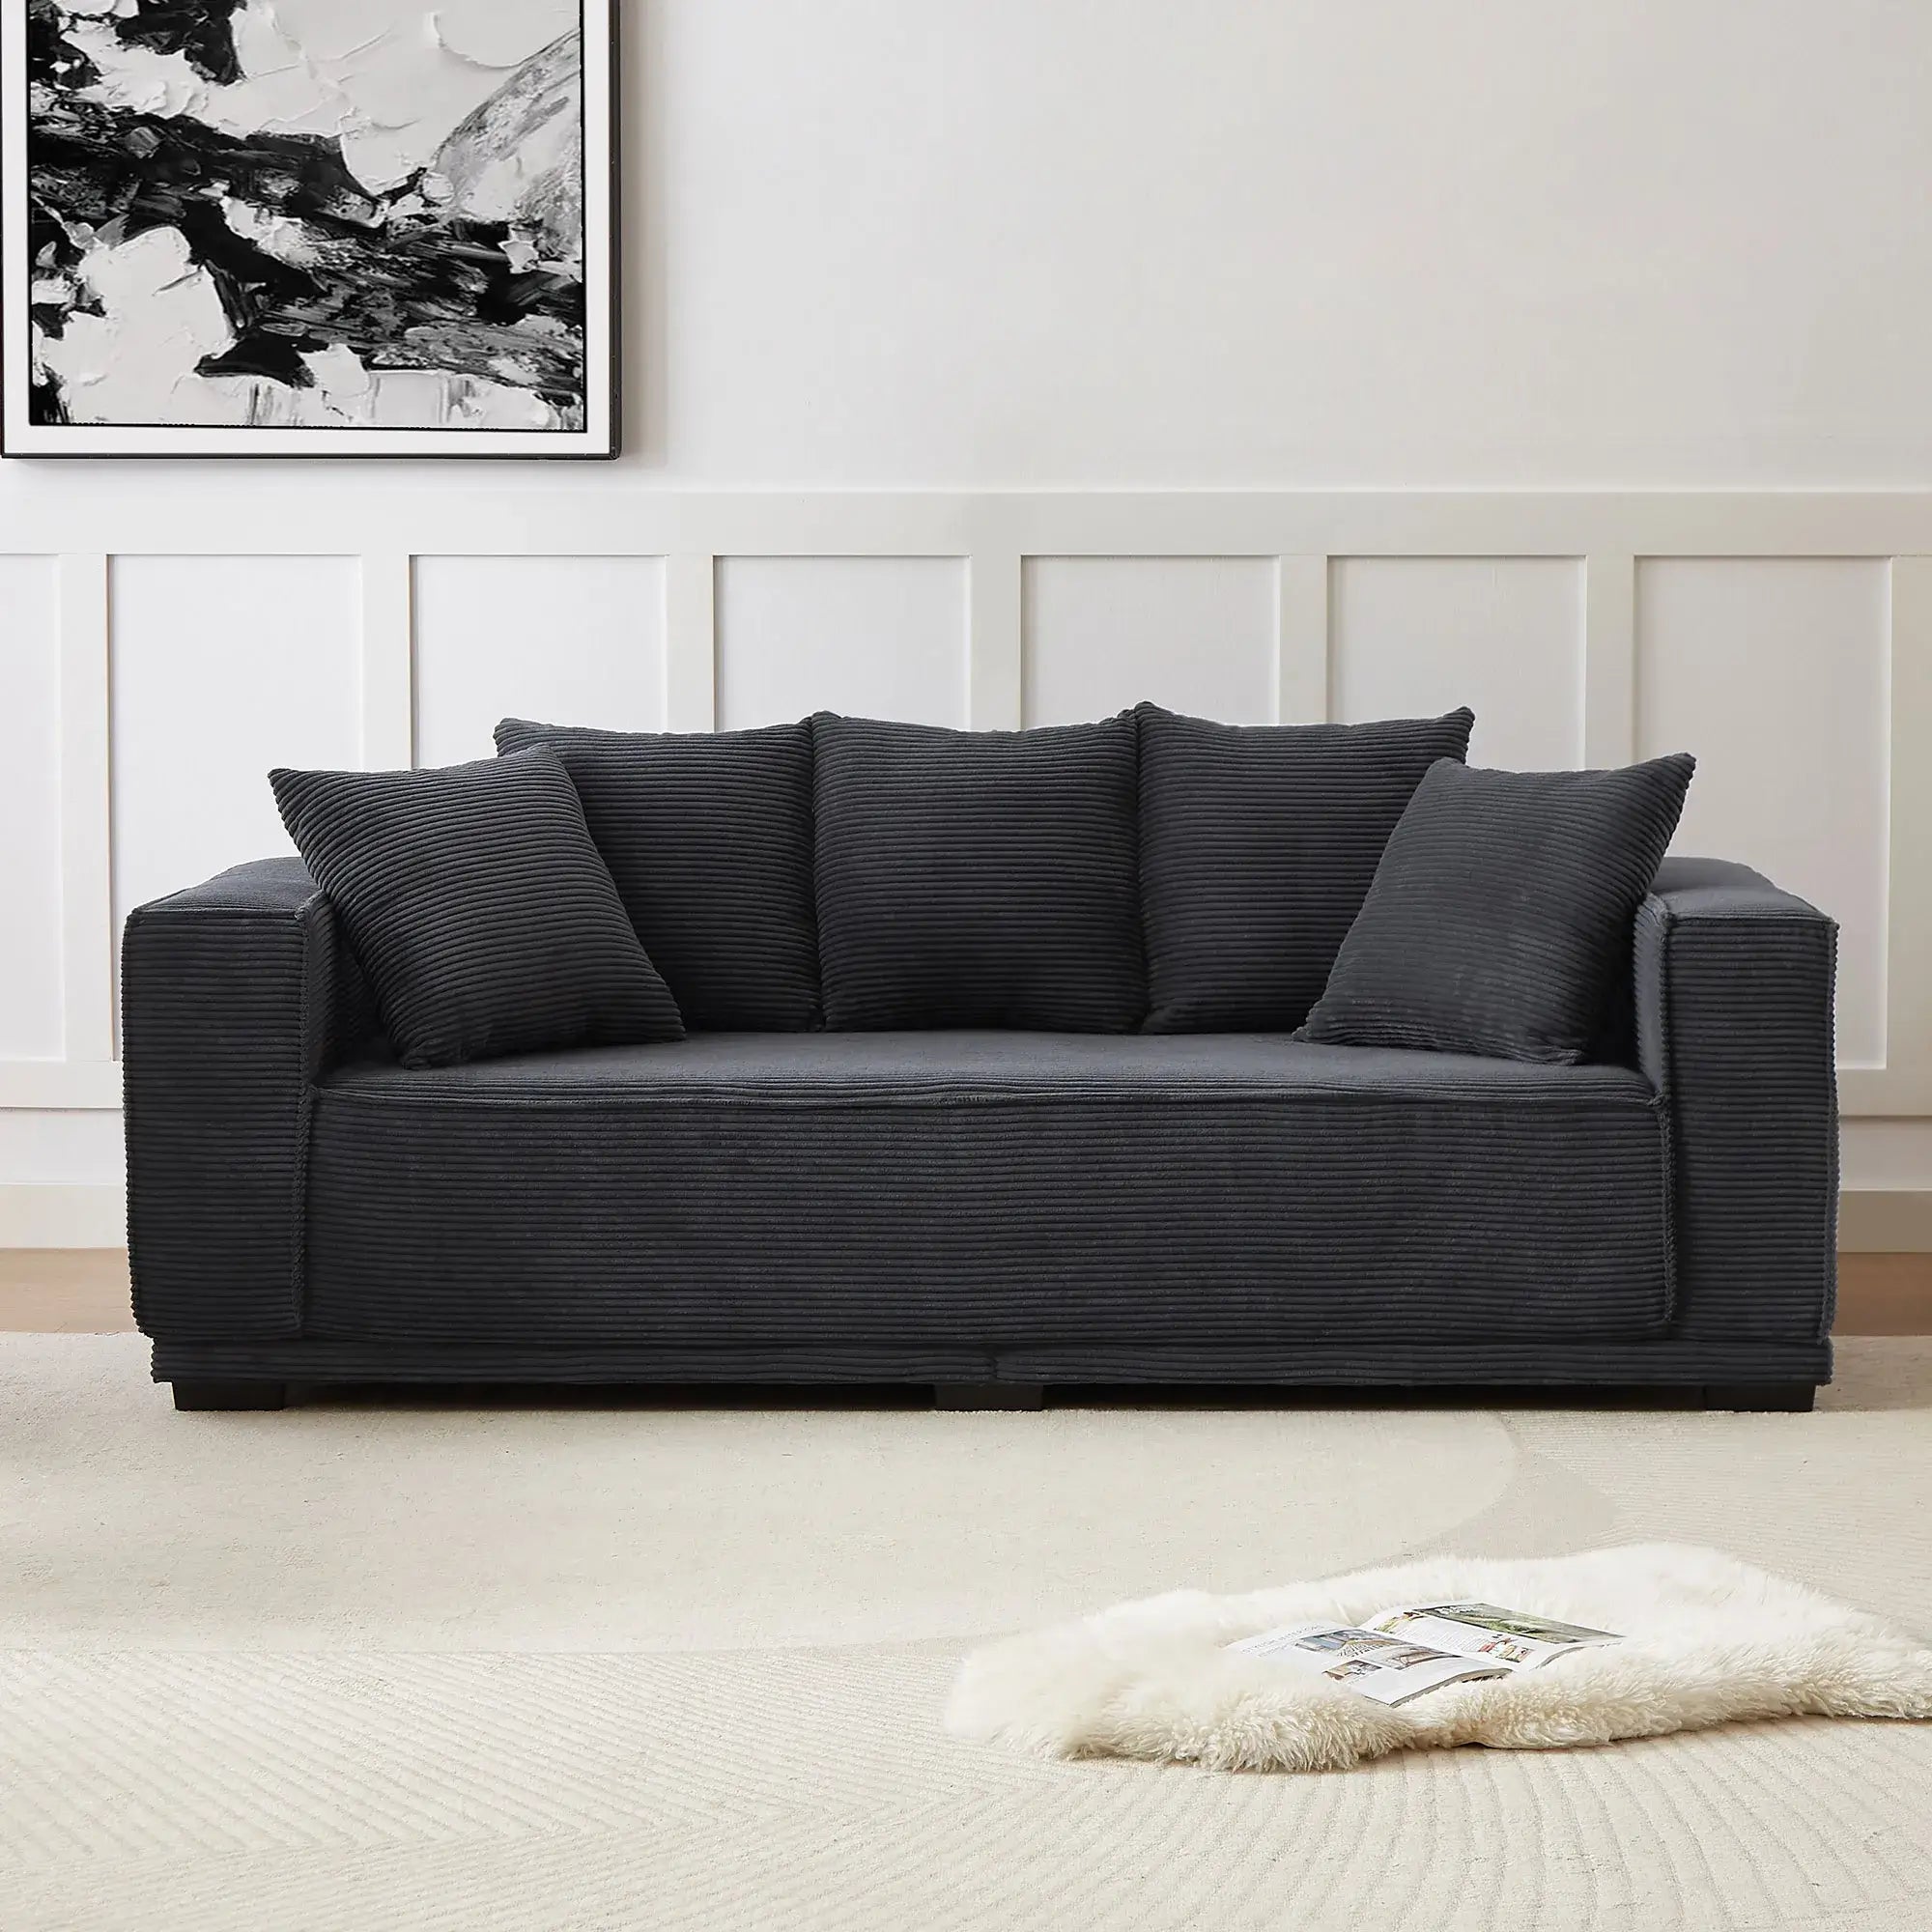 Louie Modern Corduroy Sofa, 3-Seater Couch for Living Room, Bedroom, Apartment - Black